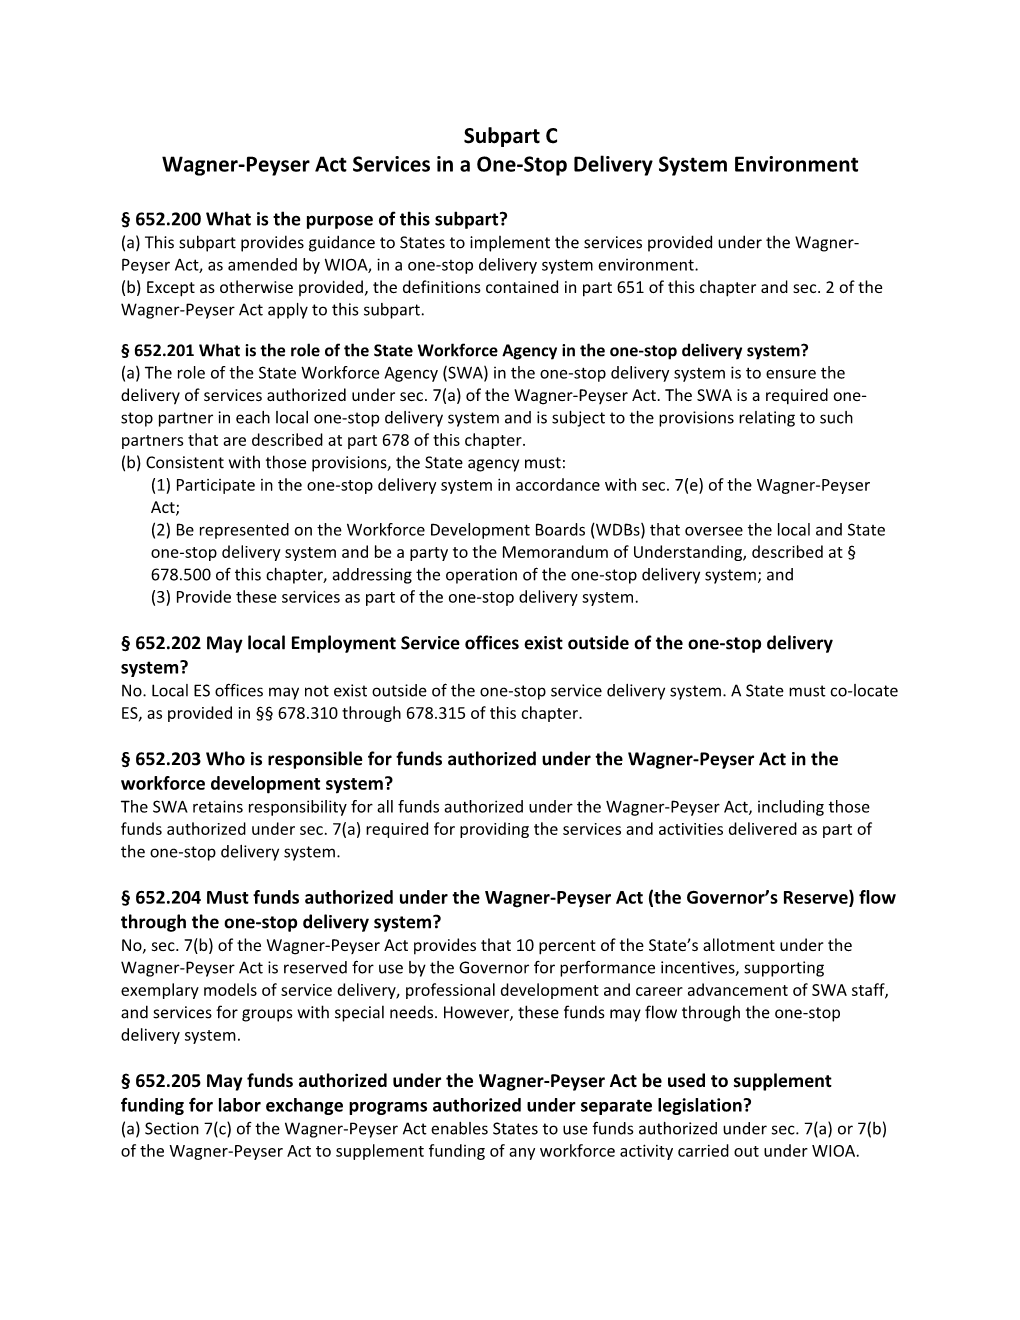 Wagner-Peyser Act Services in a One-Stop Delivery System Environment